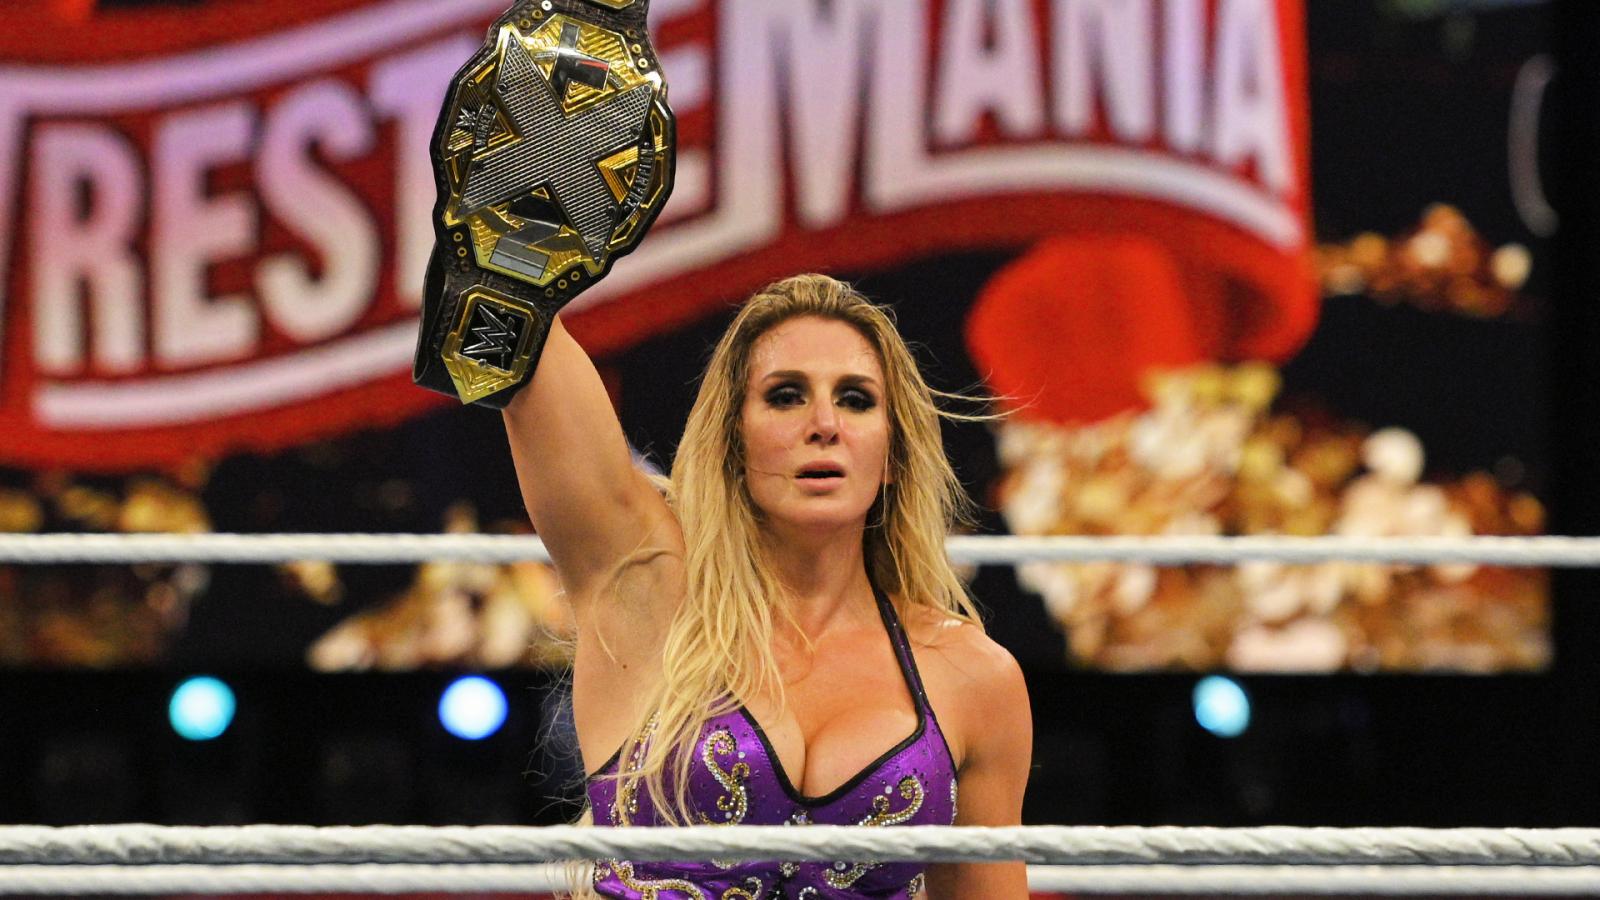 Flair's breakthrough moment came in 2015 when she won the NXT Women's Championship